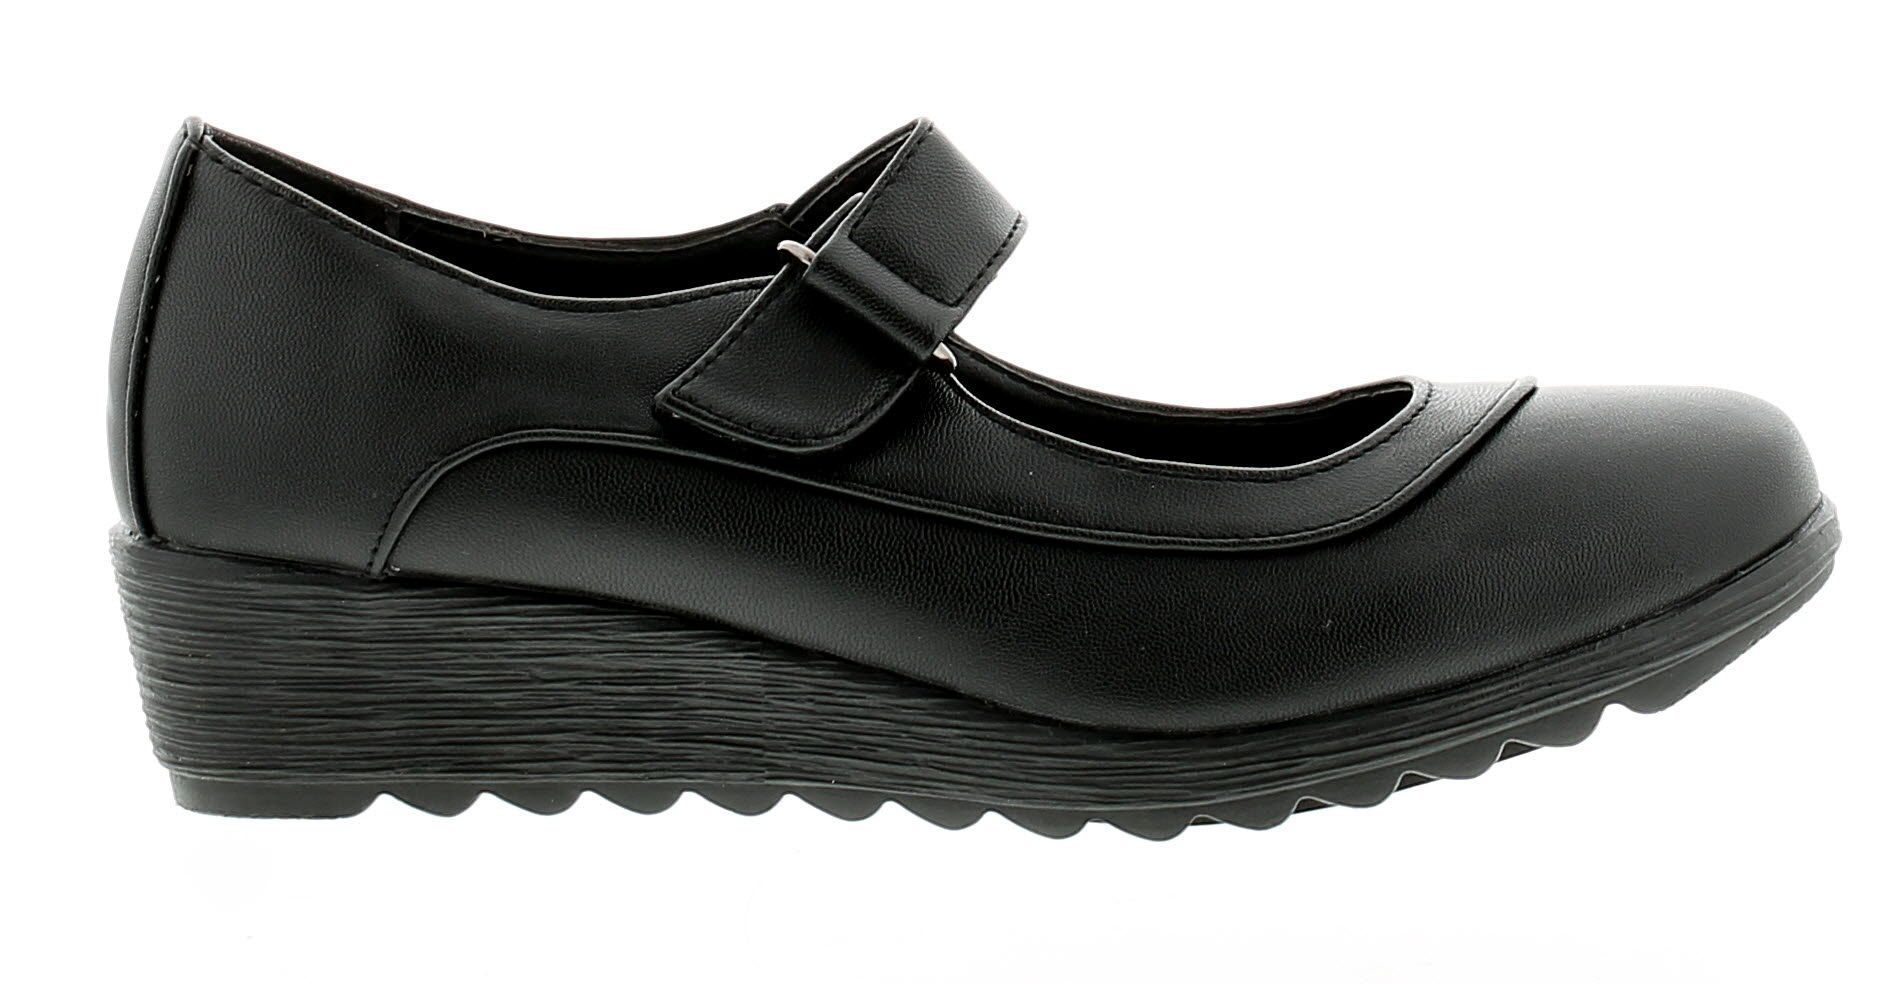 New Ladies/Womens Black Ever So Soft Touch Fastening Ballerinas Shoes.